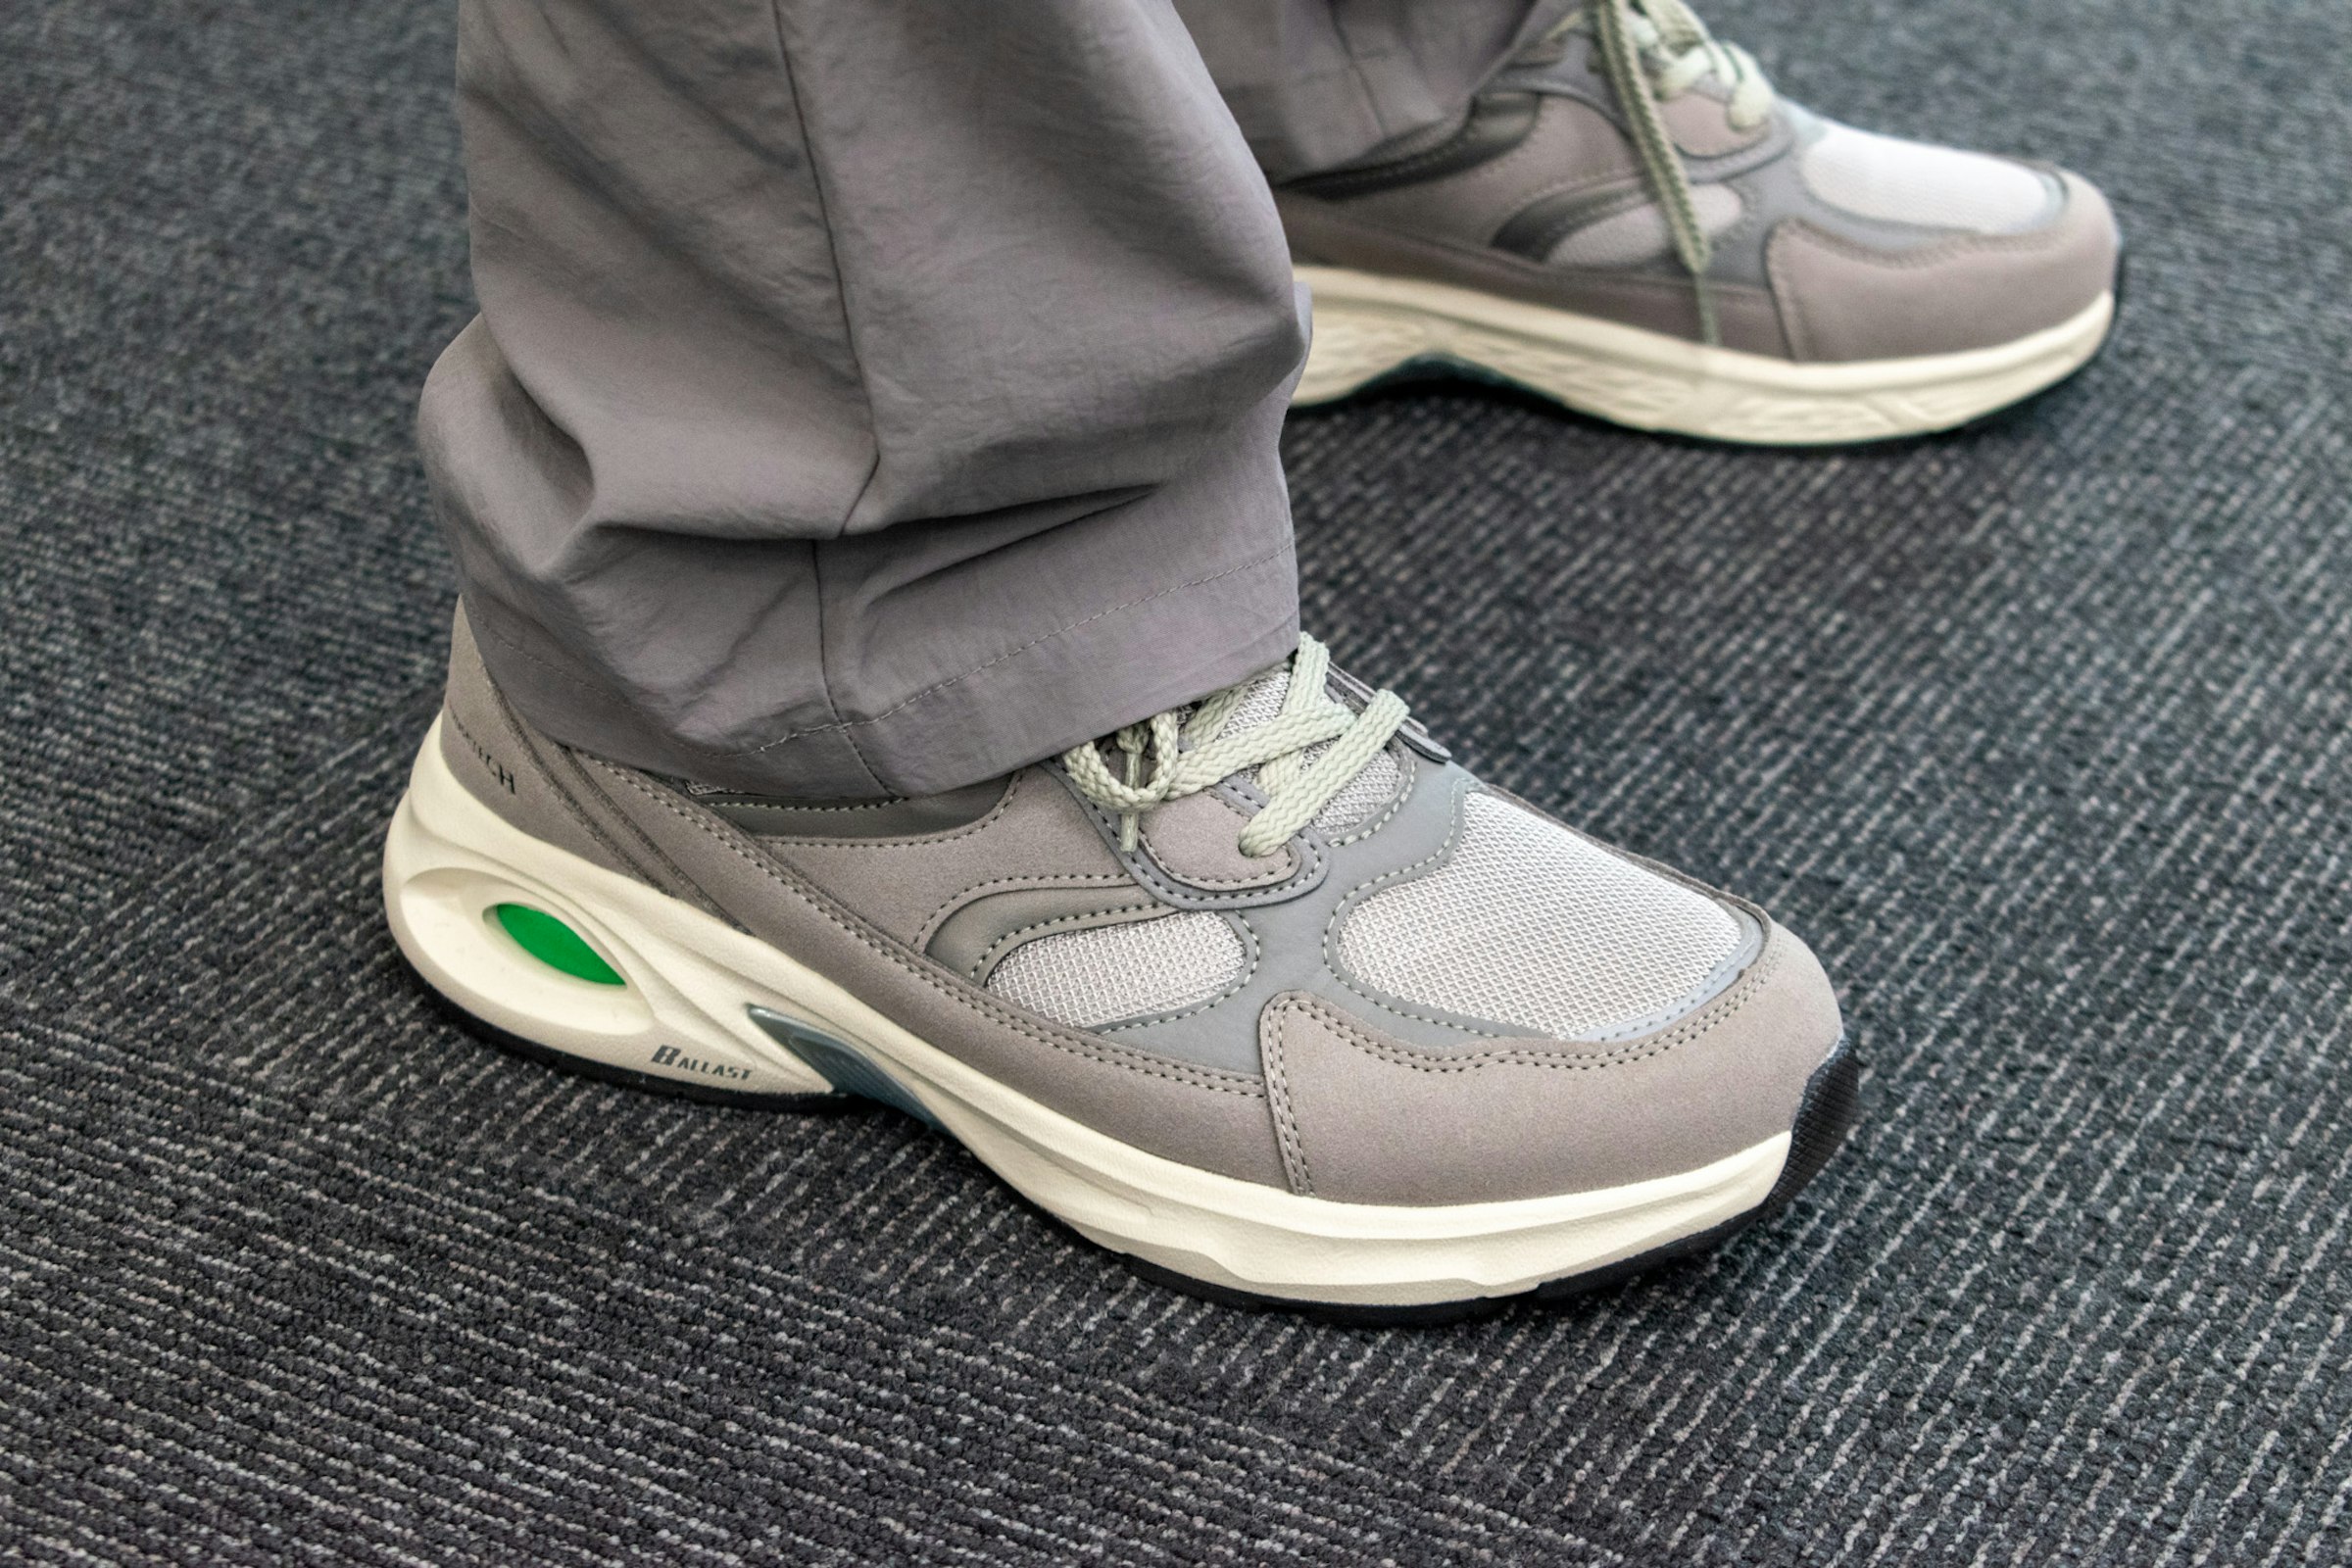 The shoes Yoshida wore at the time of the interview were Workman's new product for spring/summer 2024, the 'High Bounce Ballast Walk'.